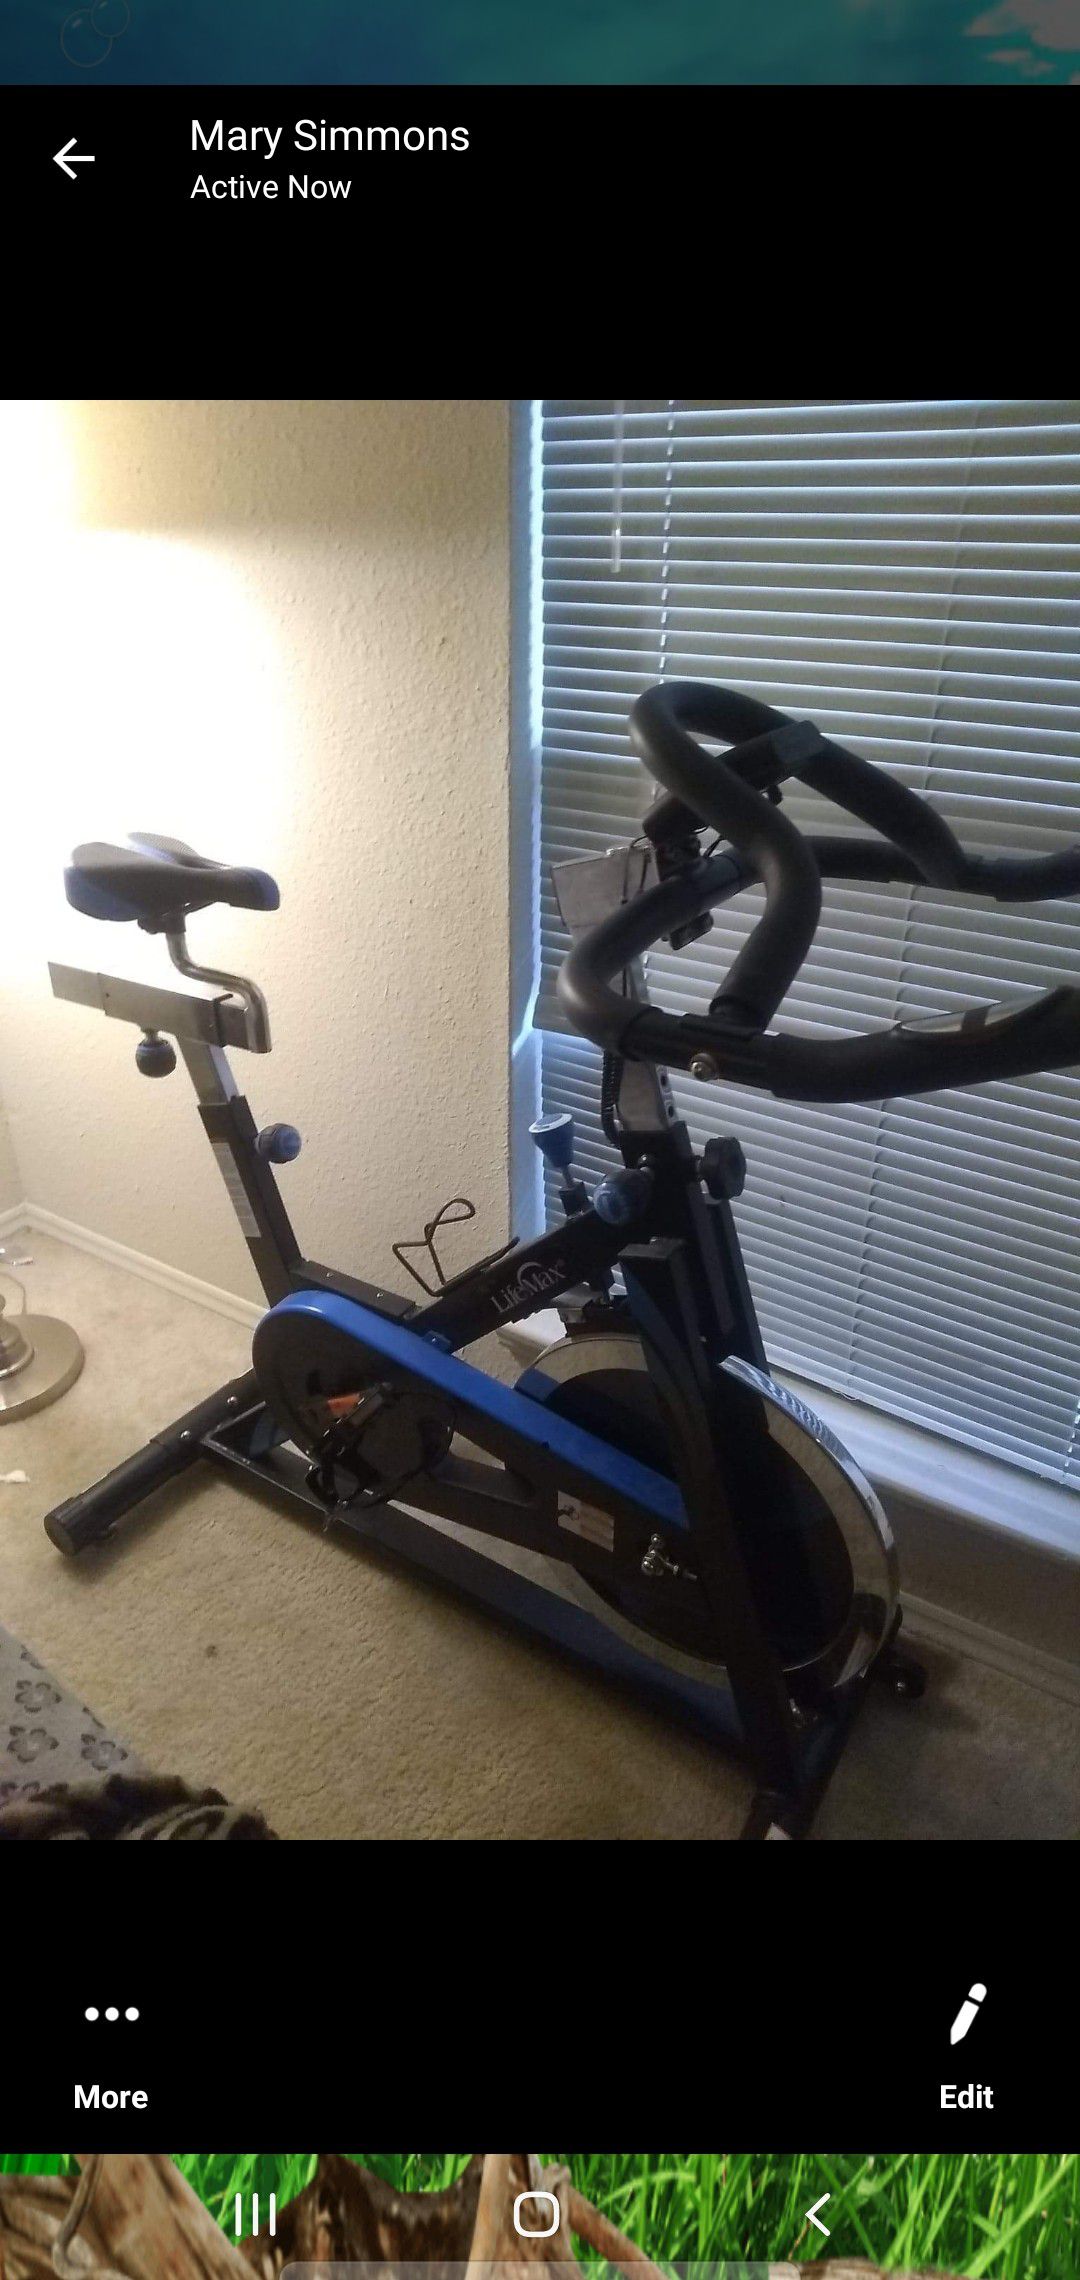 Life max exercises bike price almost 400 I'm only asking 185 new condition.